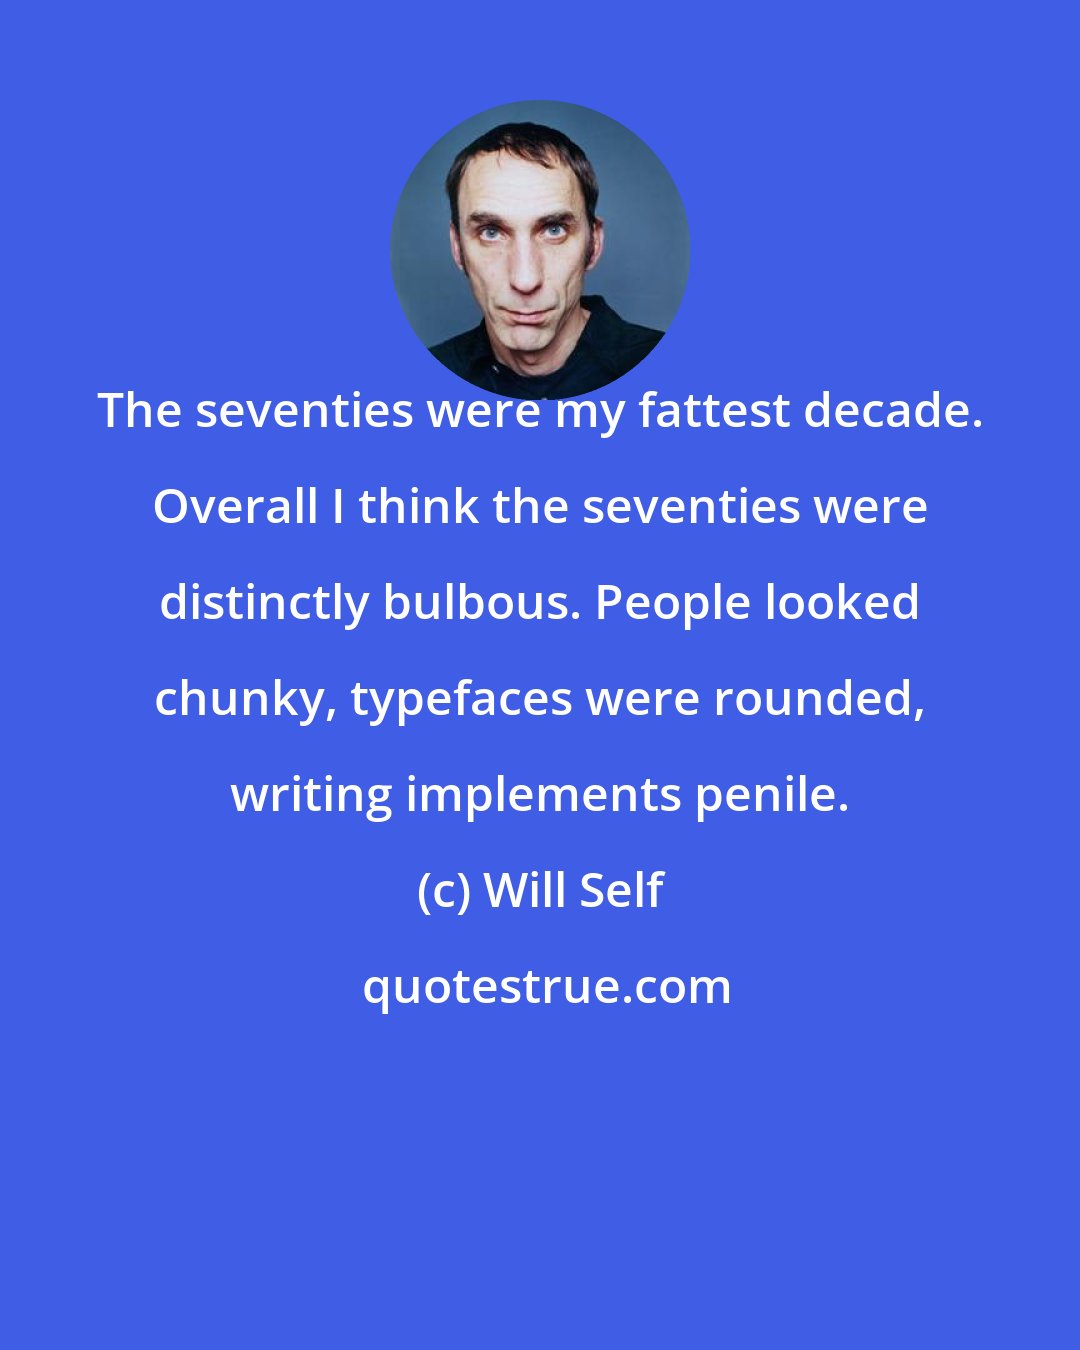 Will Self: The seventies were my fattest decade. Overall I think the seventies were distinctly bulbous. People looked chunky, typefaces were rounded, writing implements penile.